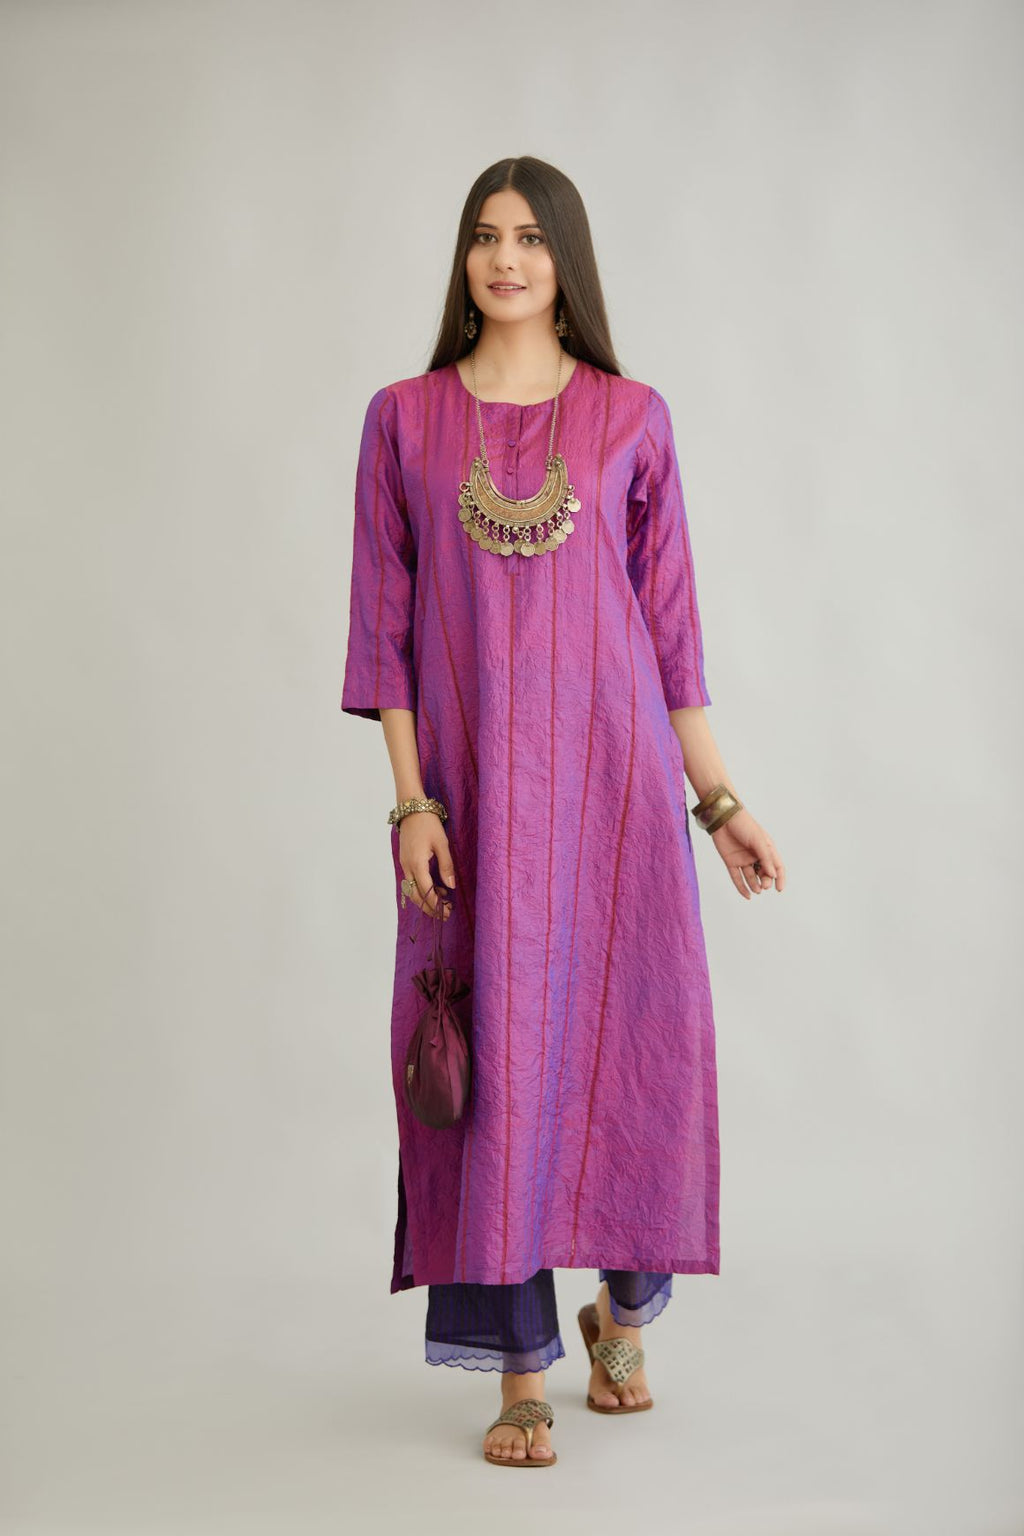 Purple hand crushed silk straight kurta set with vertical organza fabric inset stripe detail in front, back and 3/4 sleeves, highlighted with contrasting top stitch.